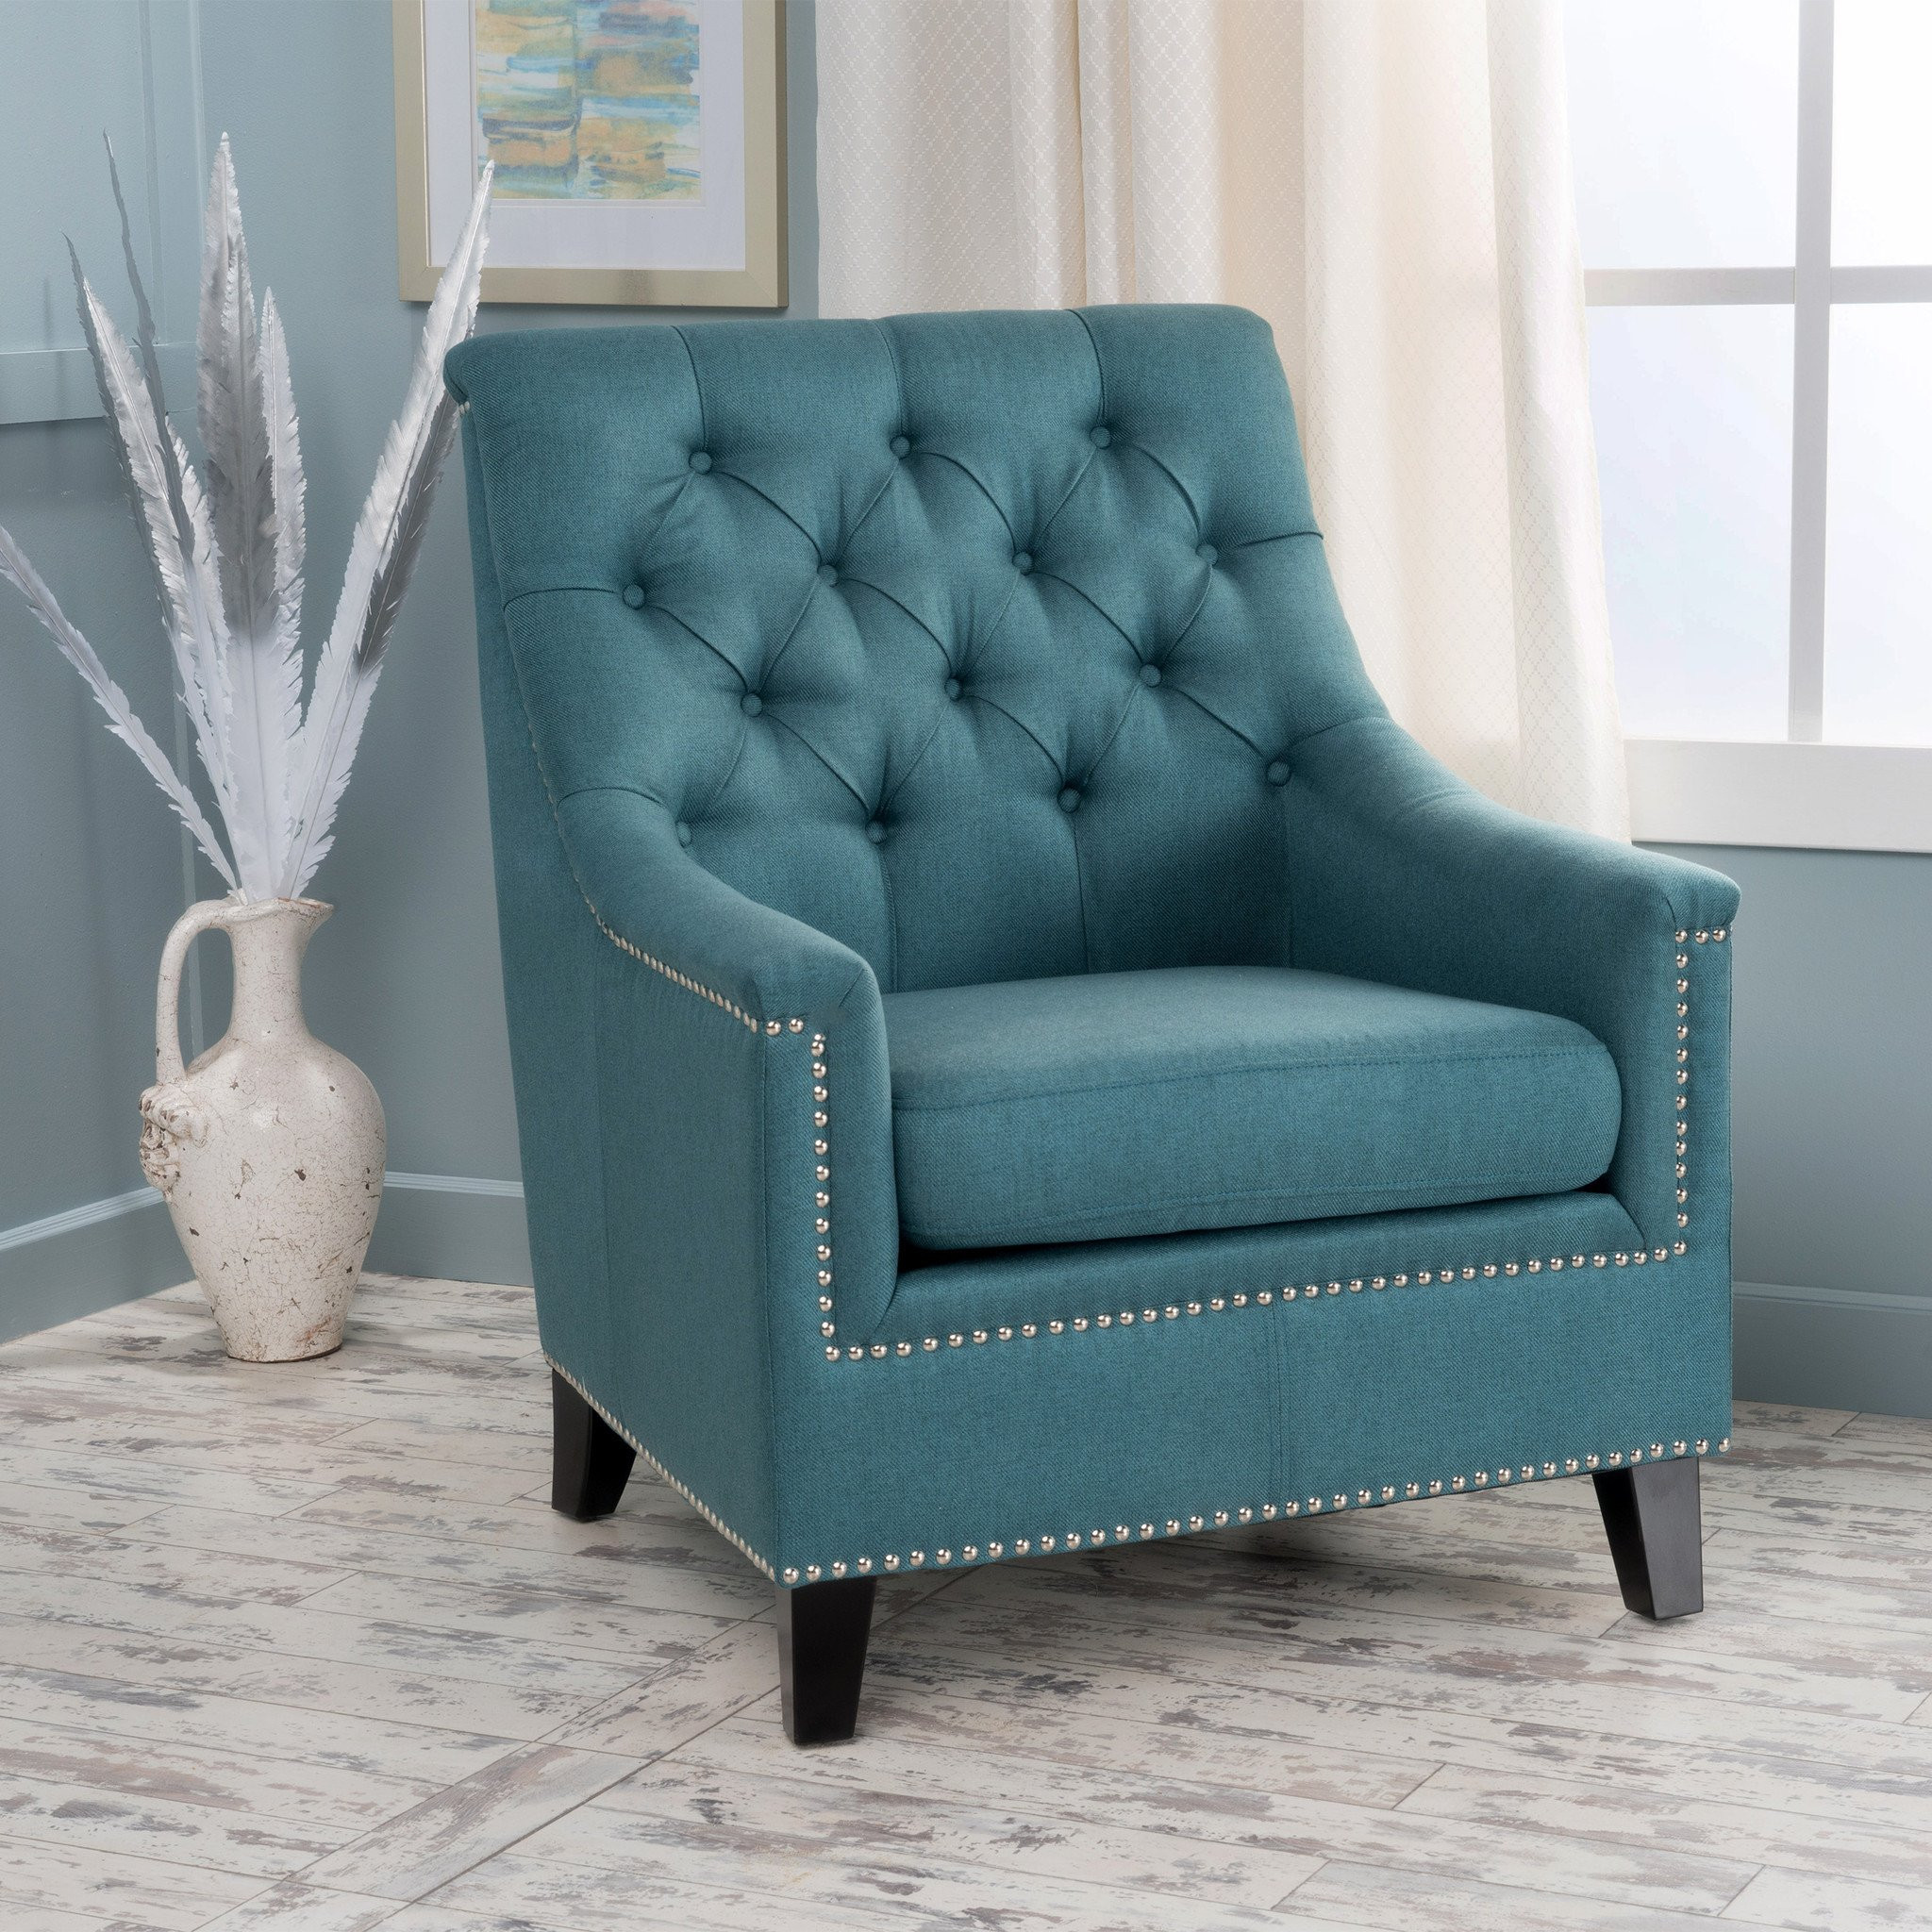 Ailsa Contemporary Fabric Tufted Club Chair